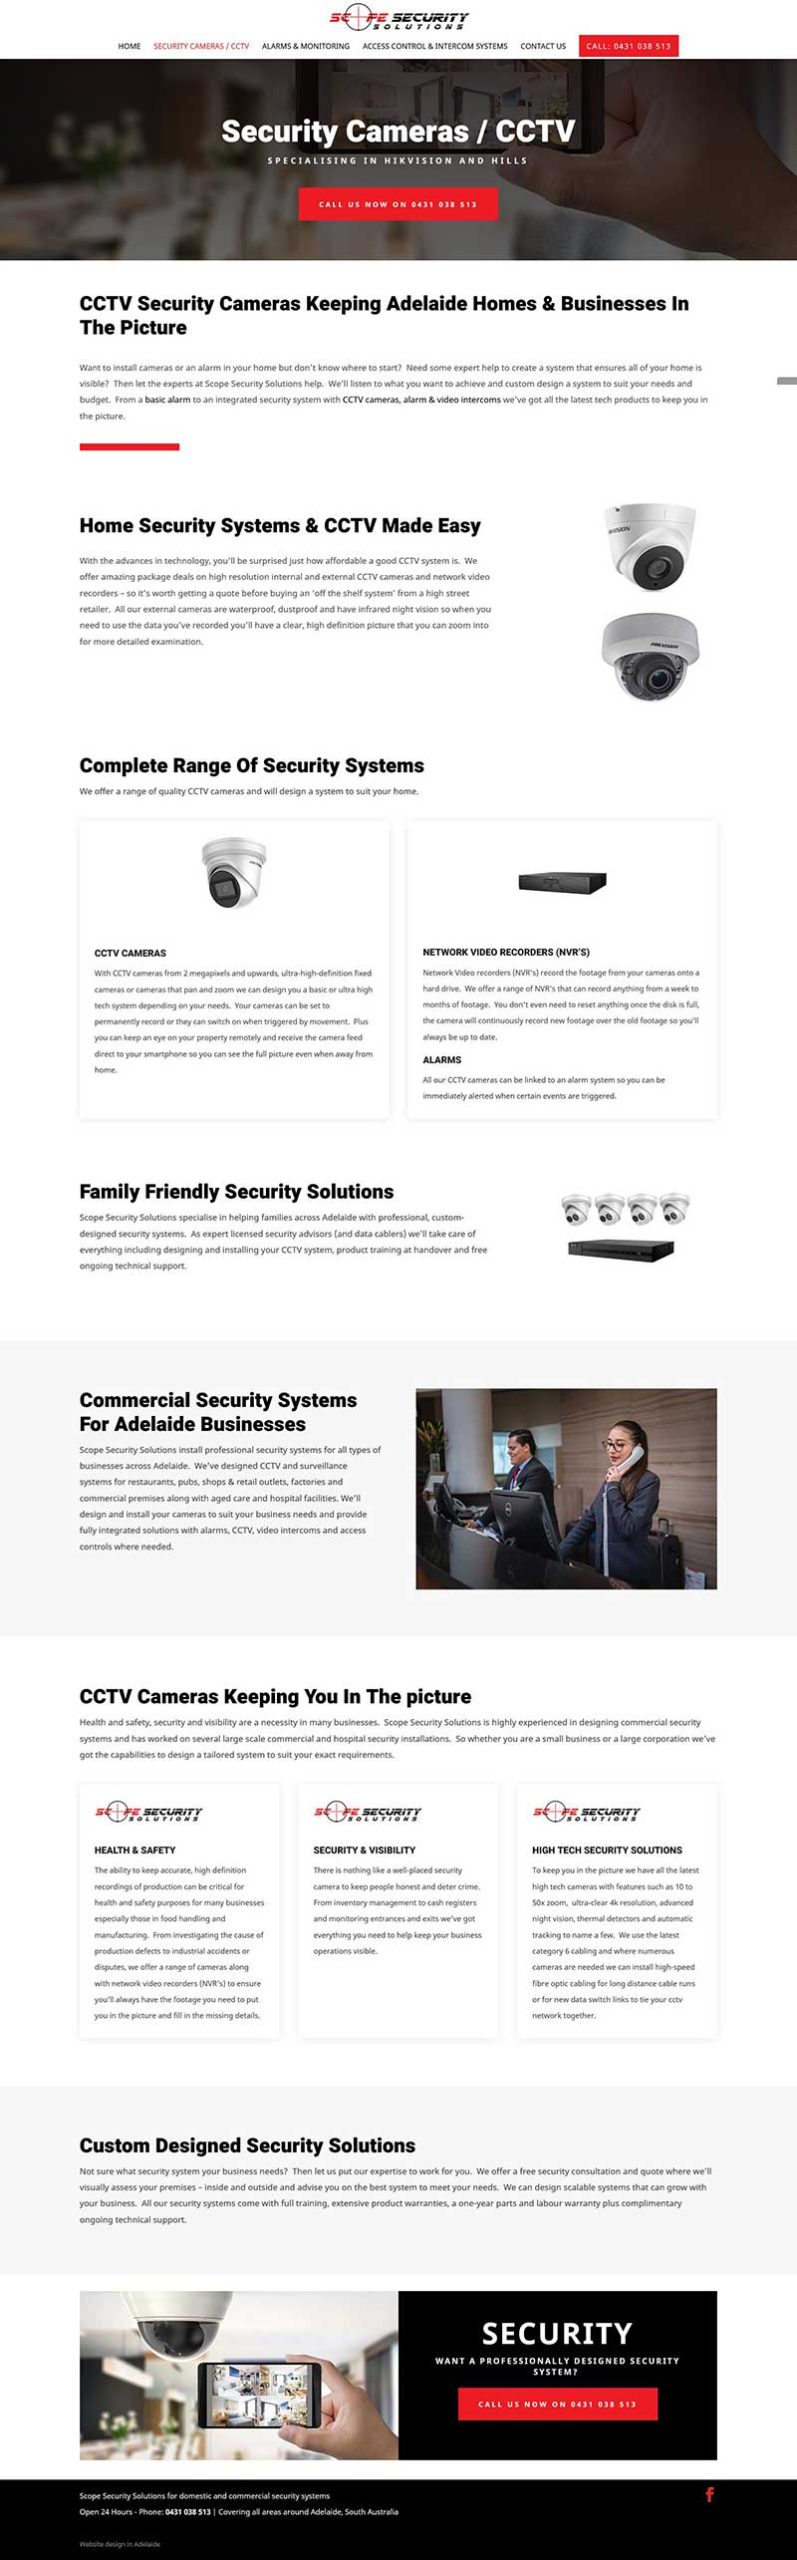 Website design and content writing for a security business